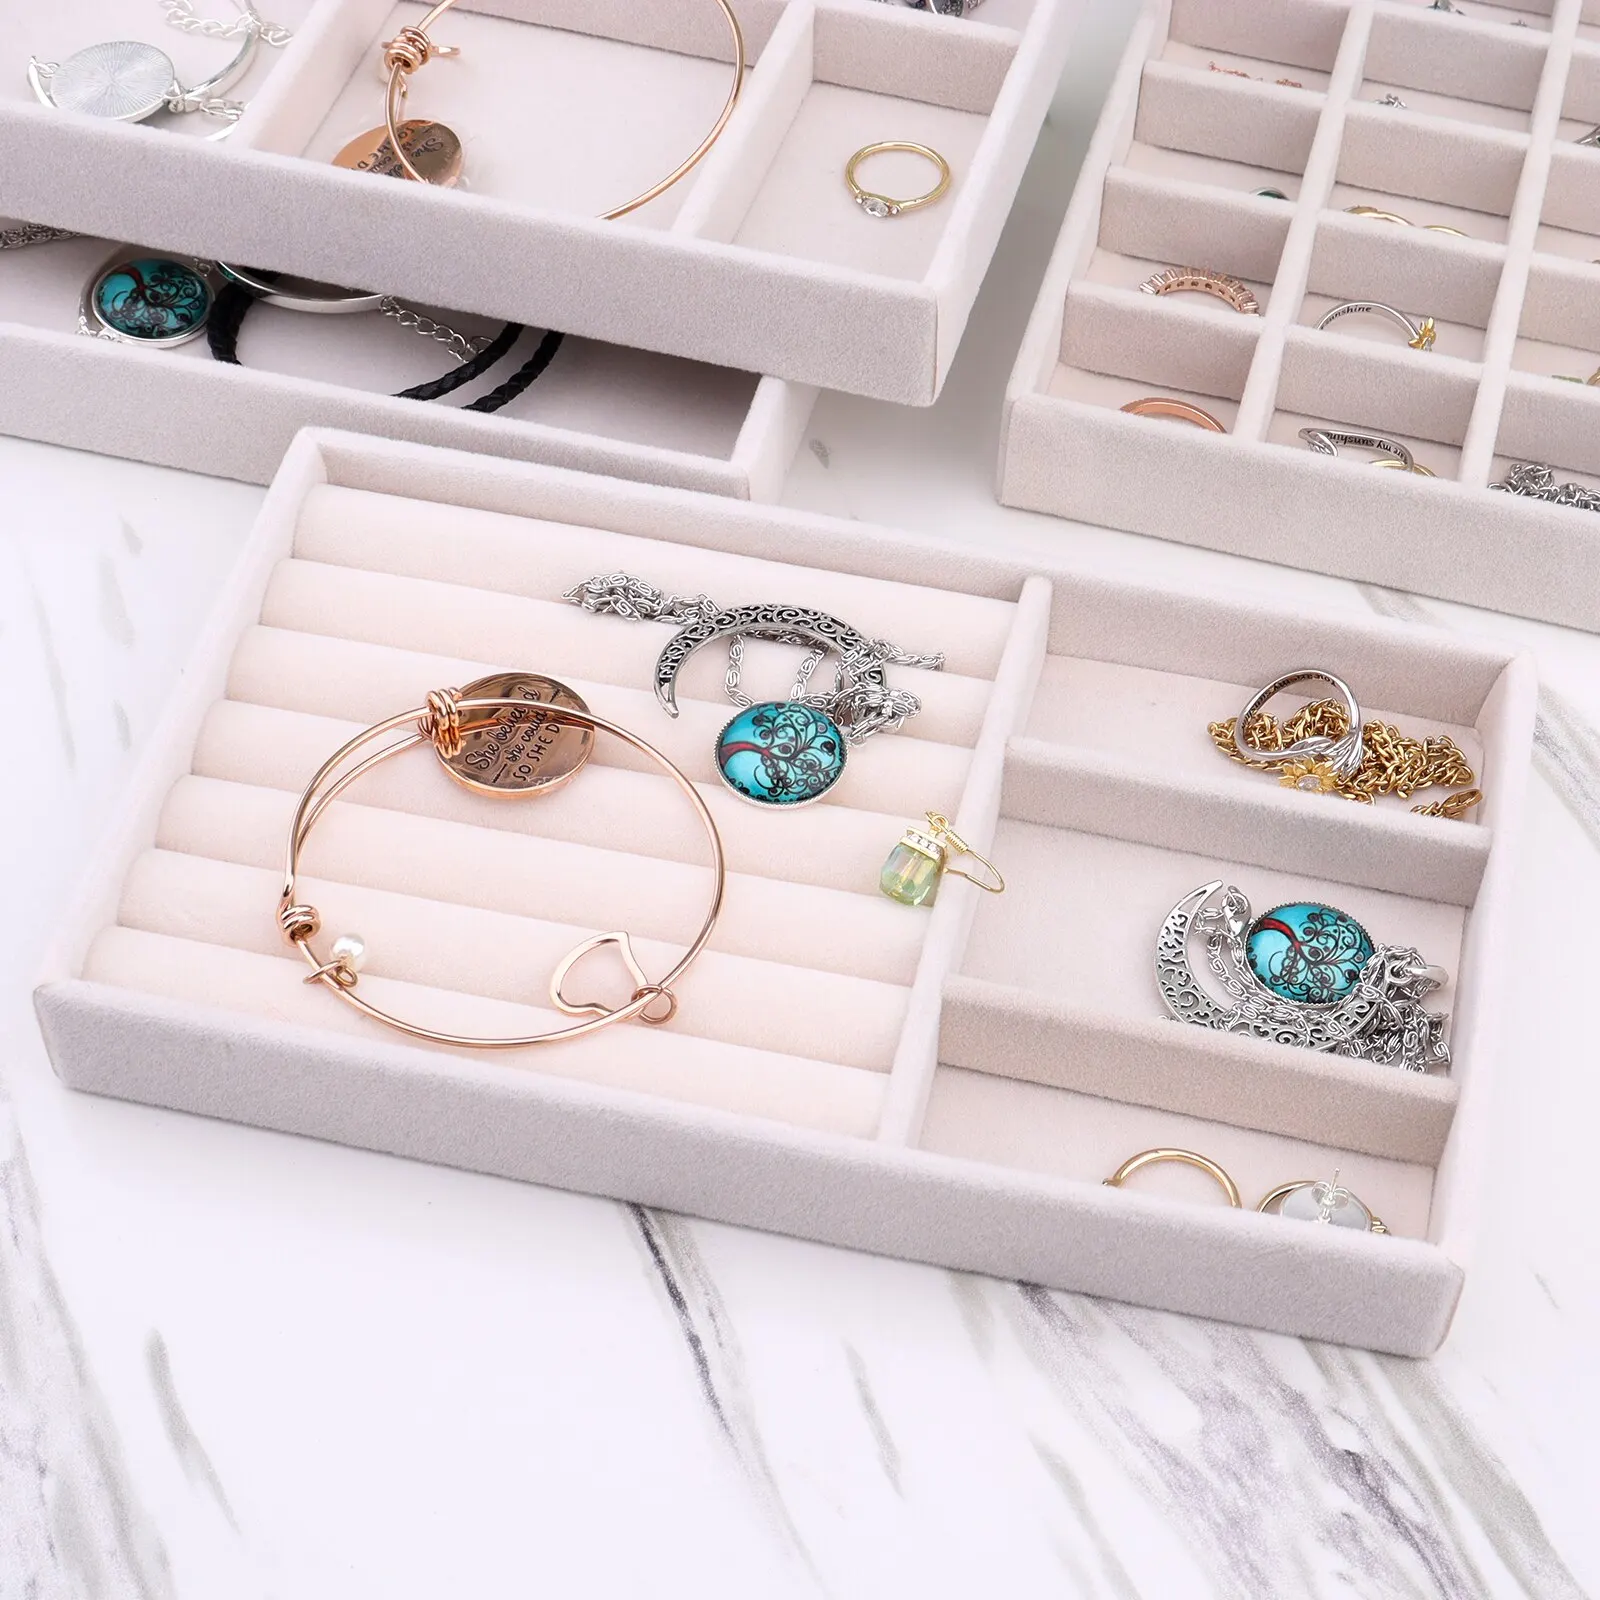 Quality Ring Jewelry Storage Box Portable Grids DIY Beads Organizer Tray  Charms Holder Case Necklace Bracelet Drawer Accessorie